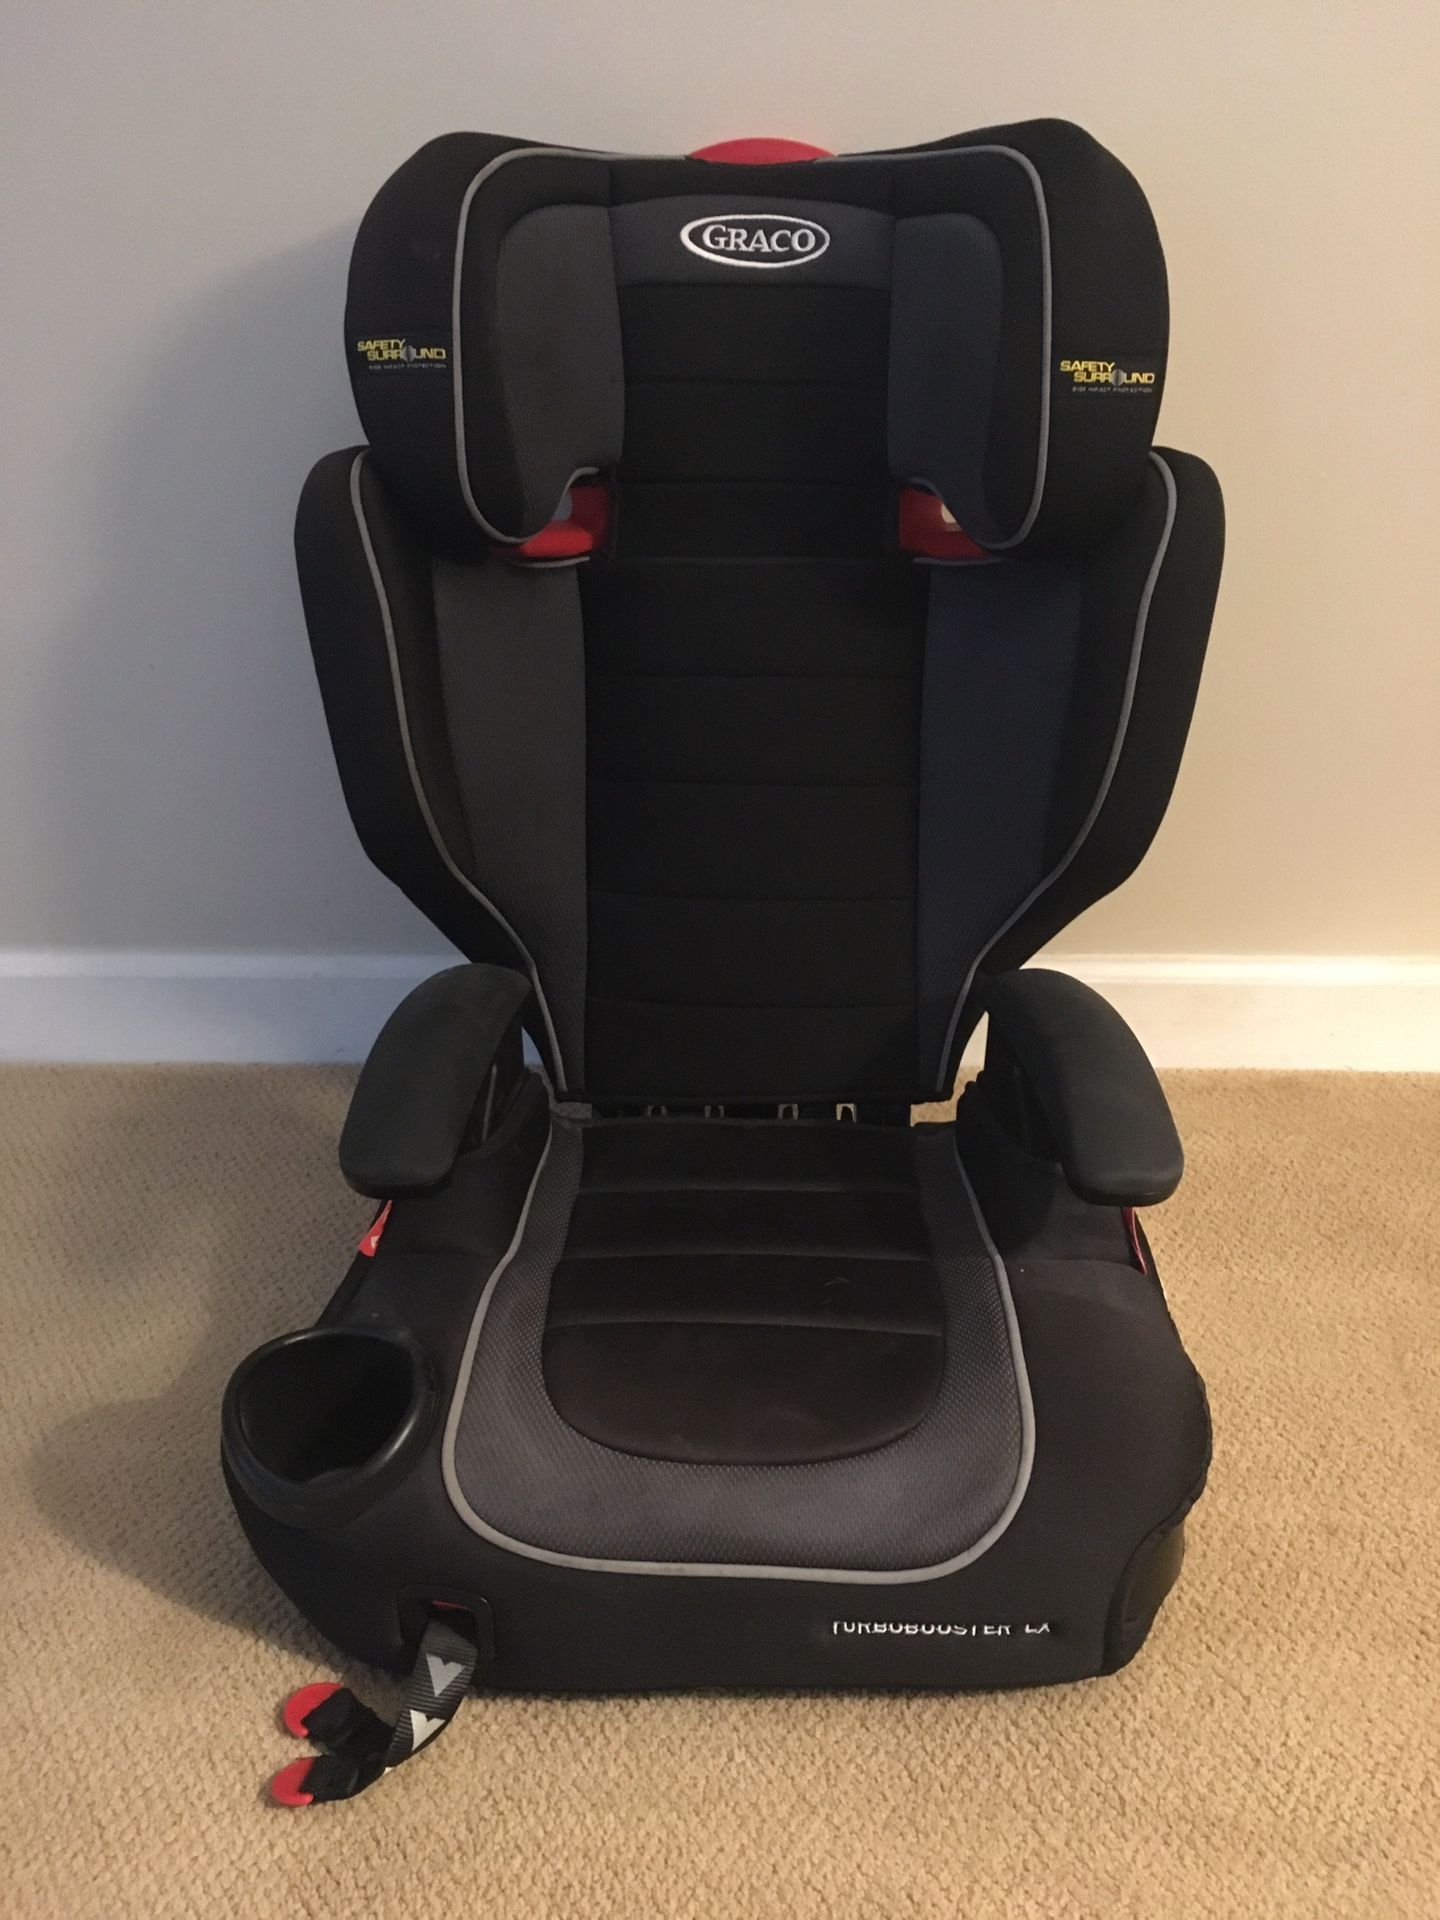 Grayco Turbobooster Lx Highback booster seat